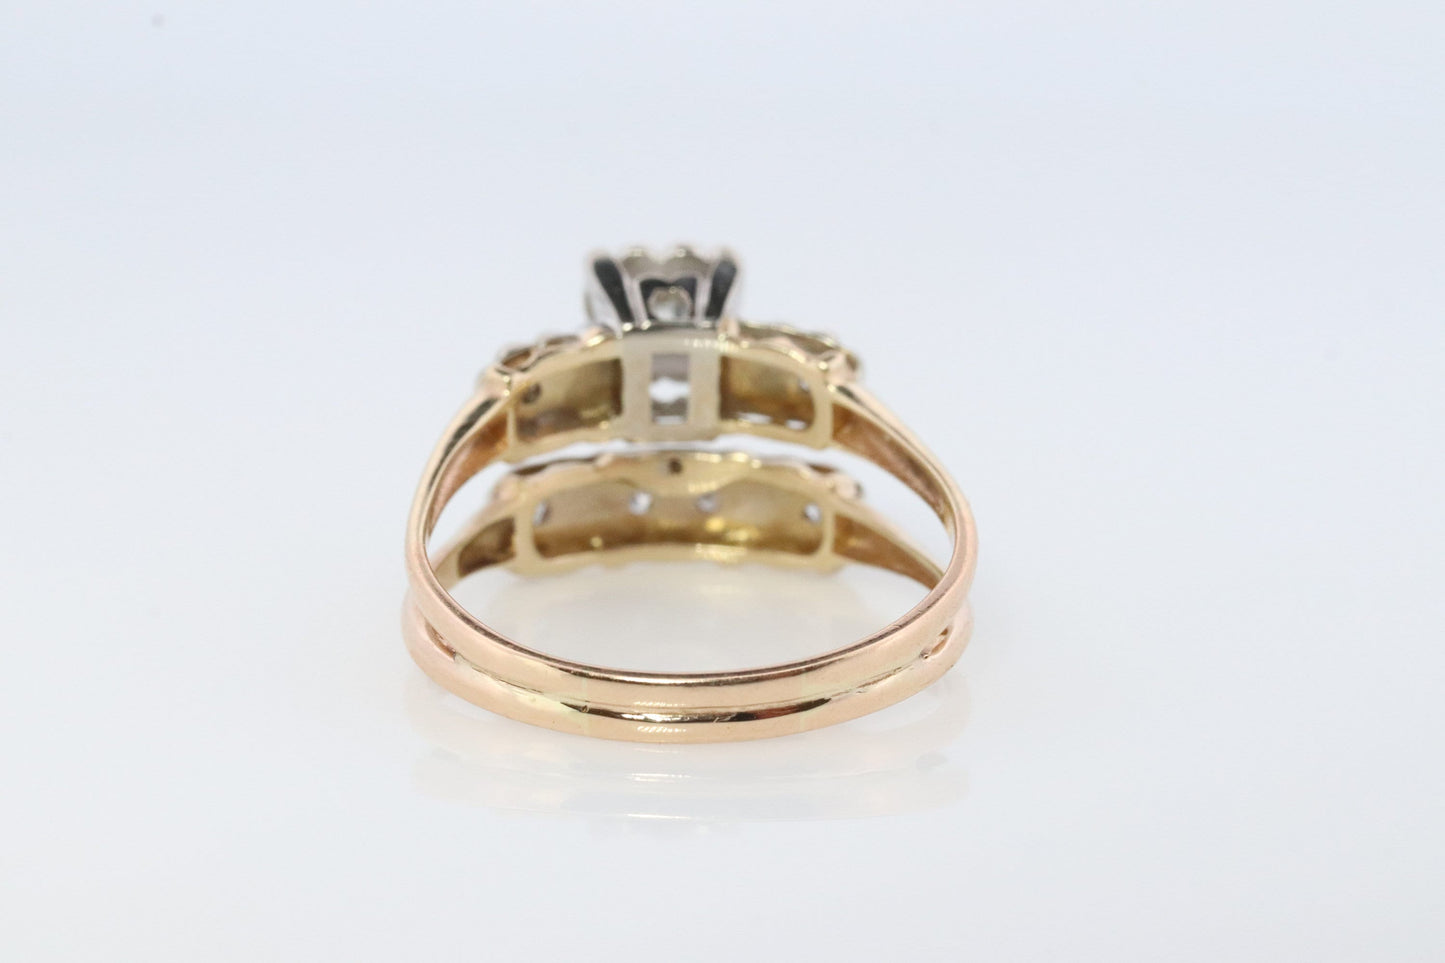 Vintage Art Deco Engagement Ring Set. 1950s. 14k Yellow and White Gold Diamond Wedding and Engagement Ring Set.